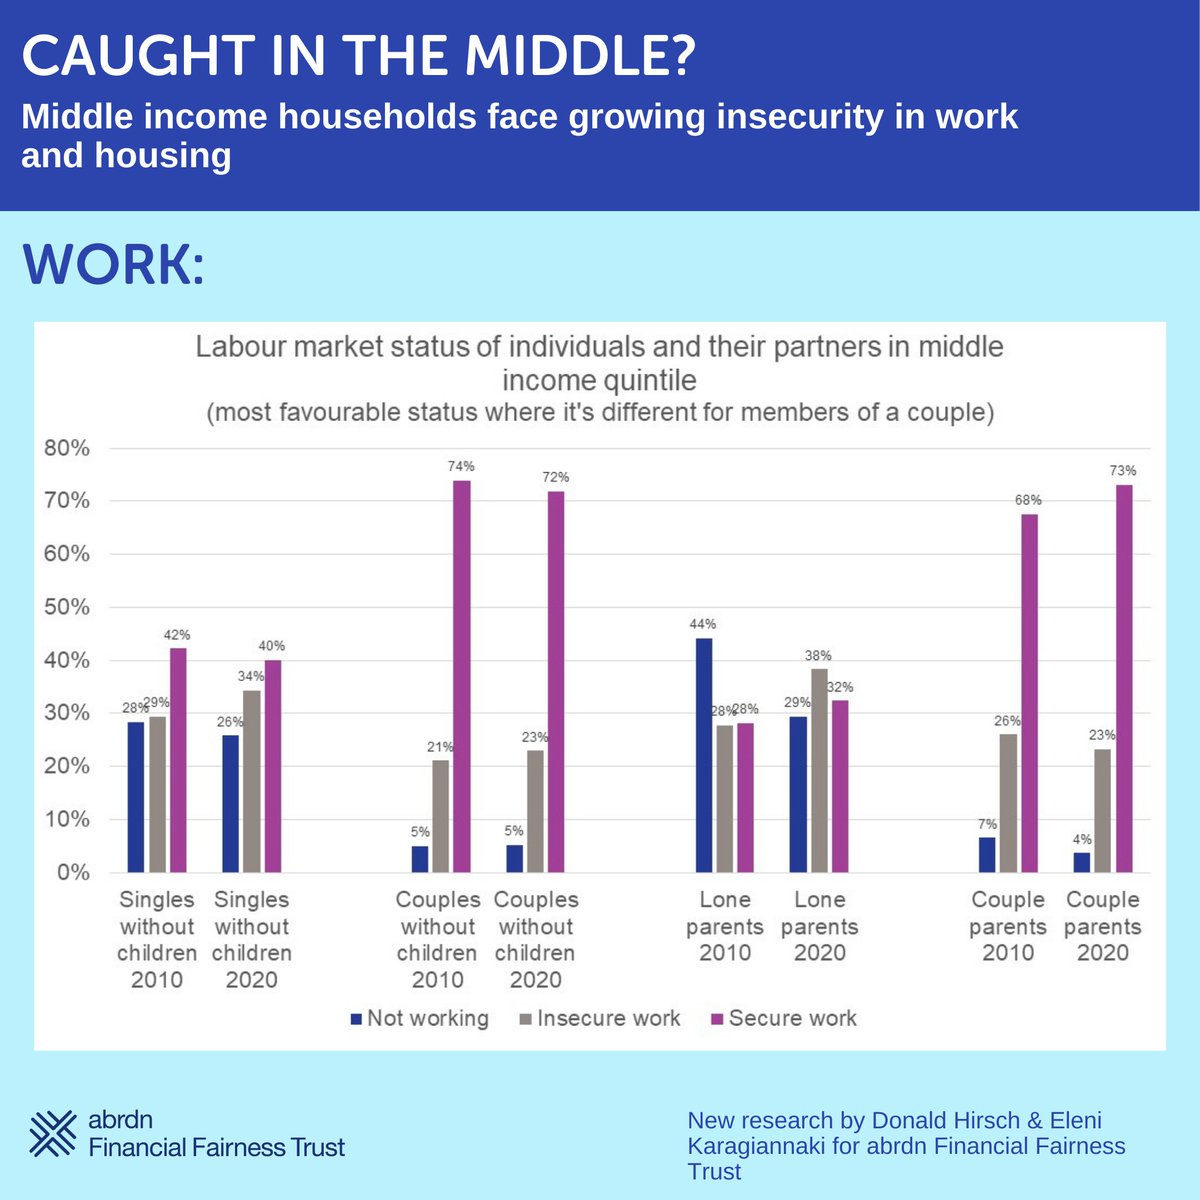 Job insecurity among the middle third of the income distribution has worsened. In particular, insecure work has grown sharply for single adults - most lone parents on middle incomes have insecure jobs. New research by @donaldhirsch published today: financialfairness.org.uk/en/media-centr…